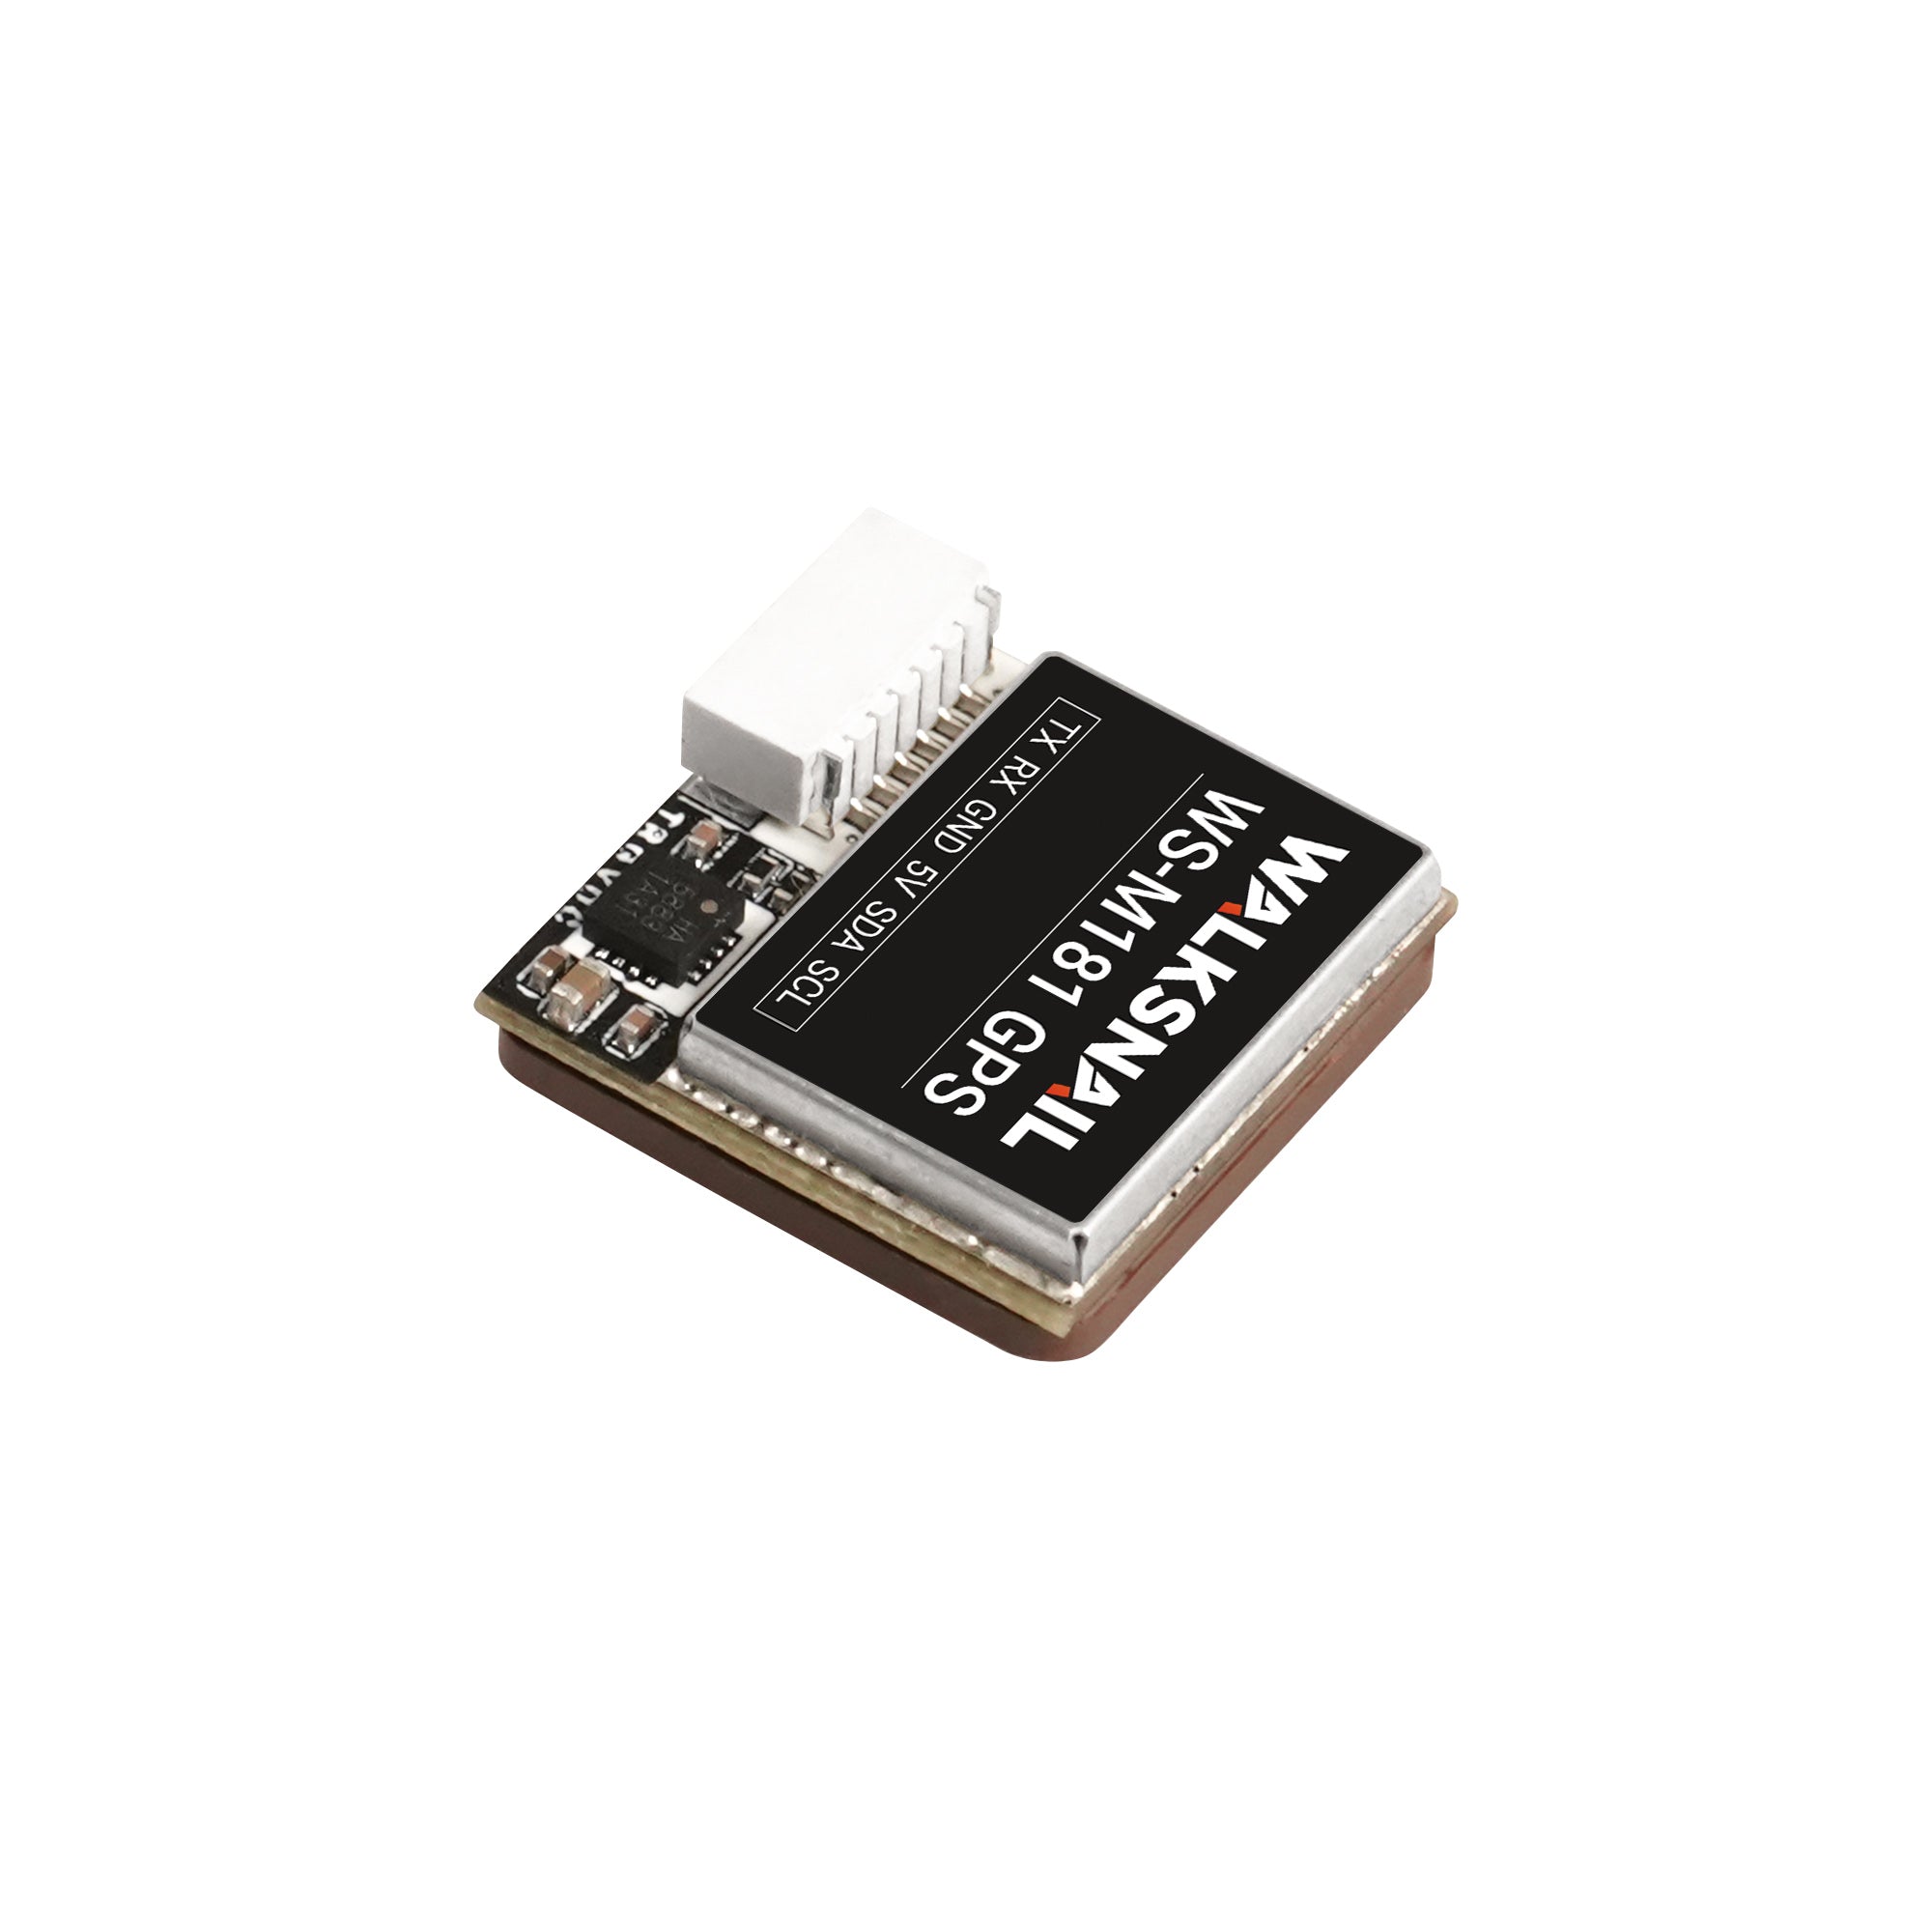 Walksnail WS-M181 GPS Module with Built in Mag COPJ-18GPS